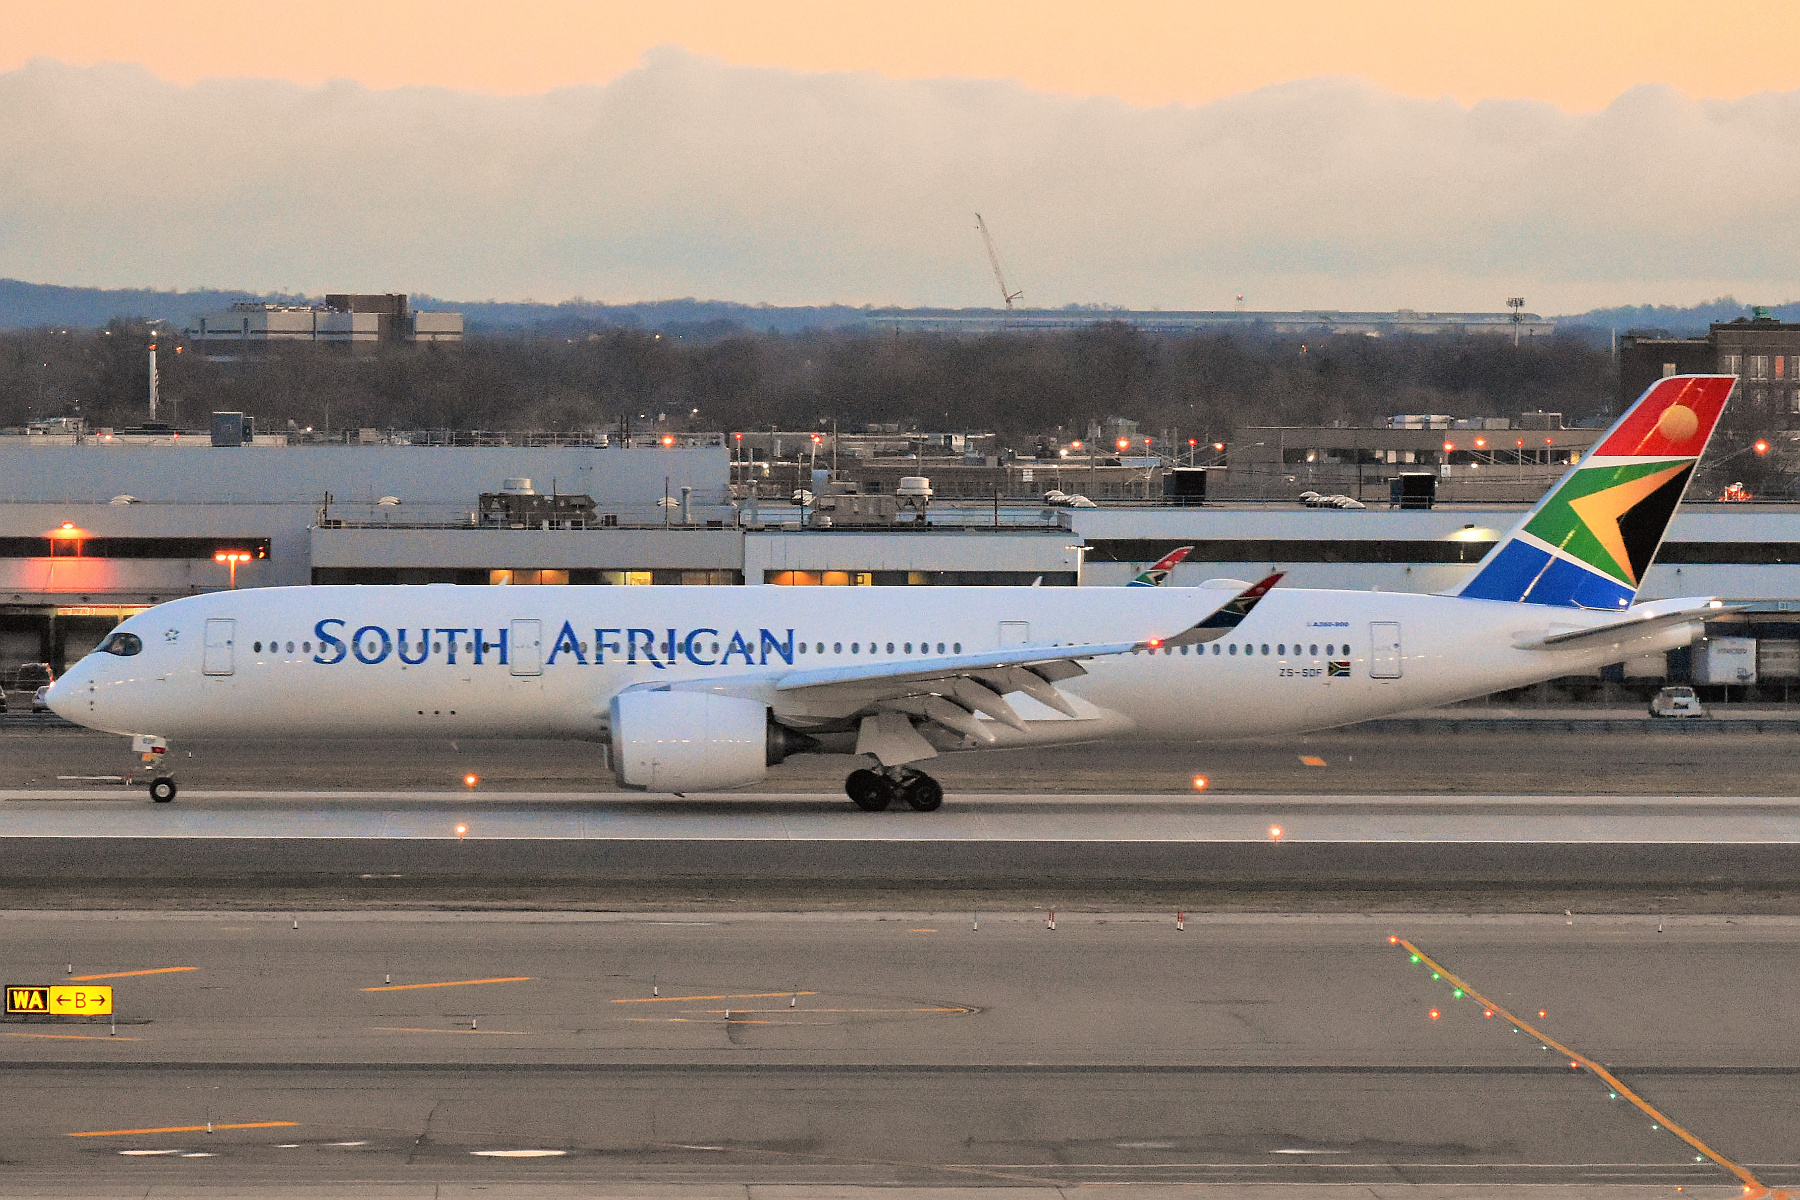 South African Airways Jet at JFK Airport